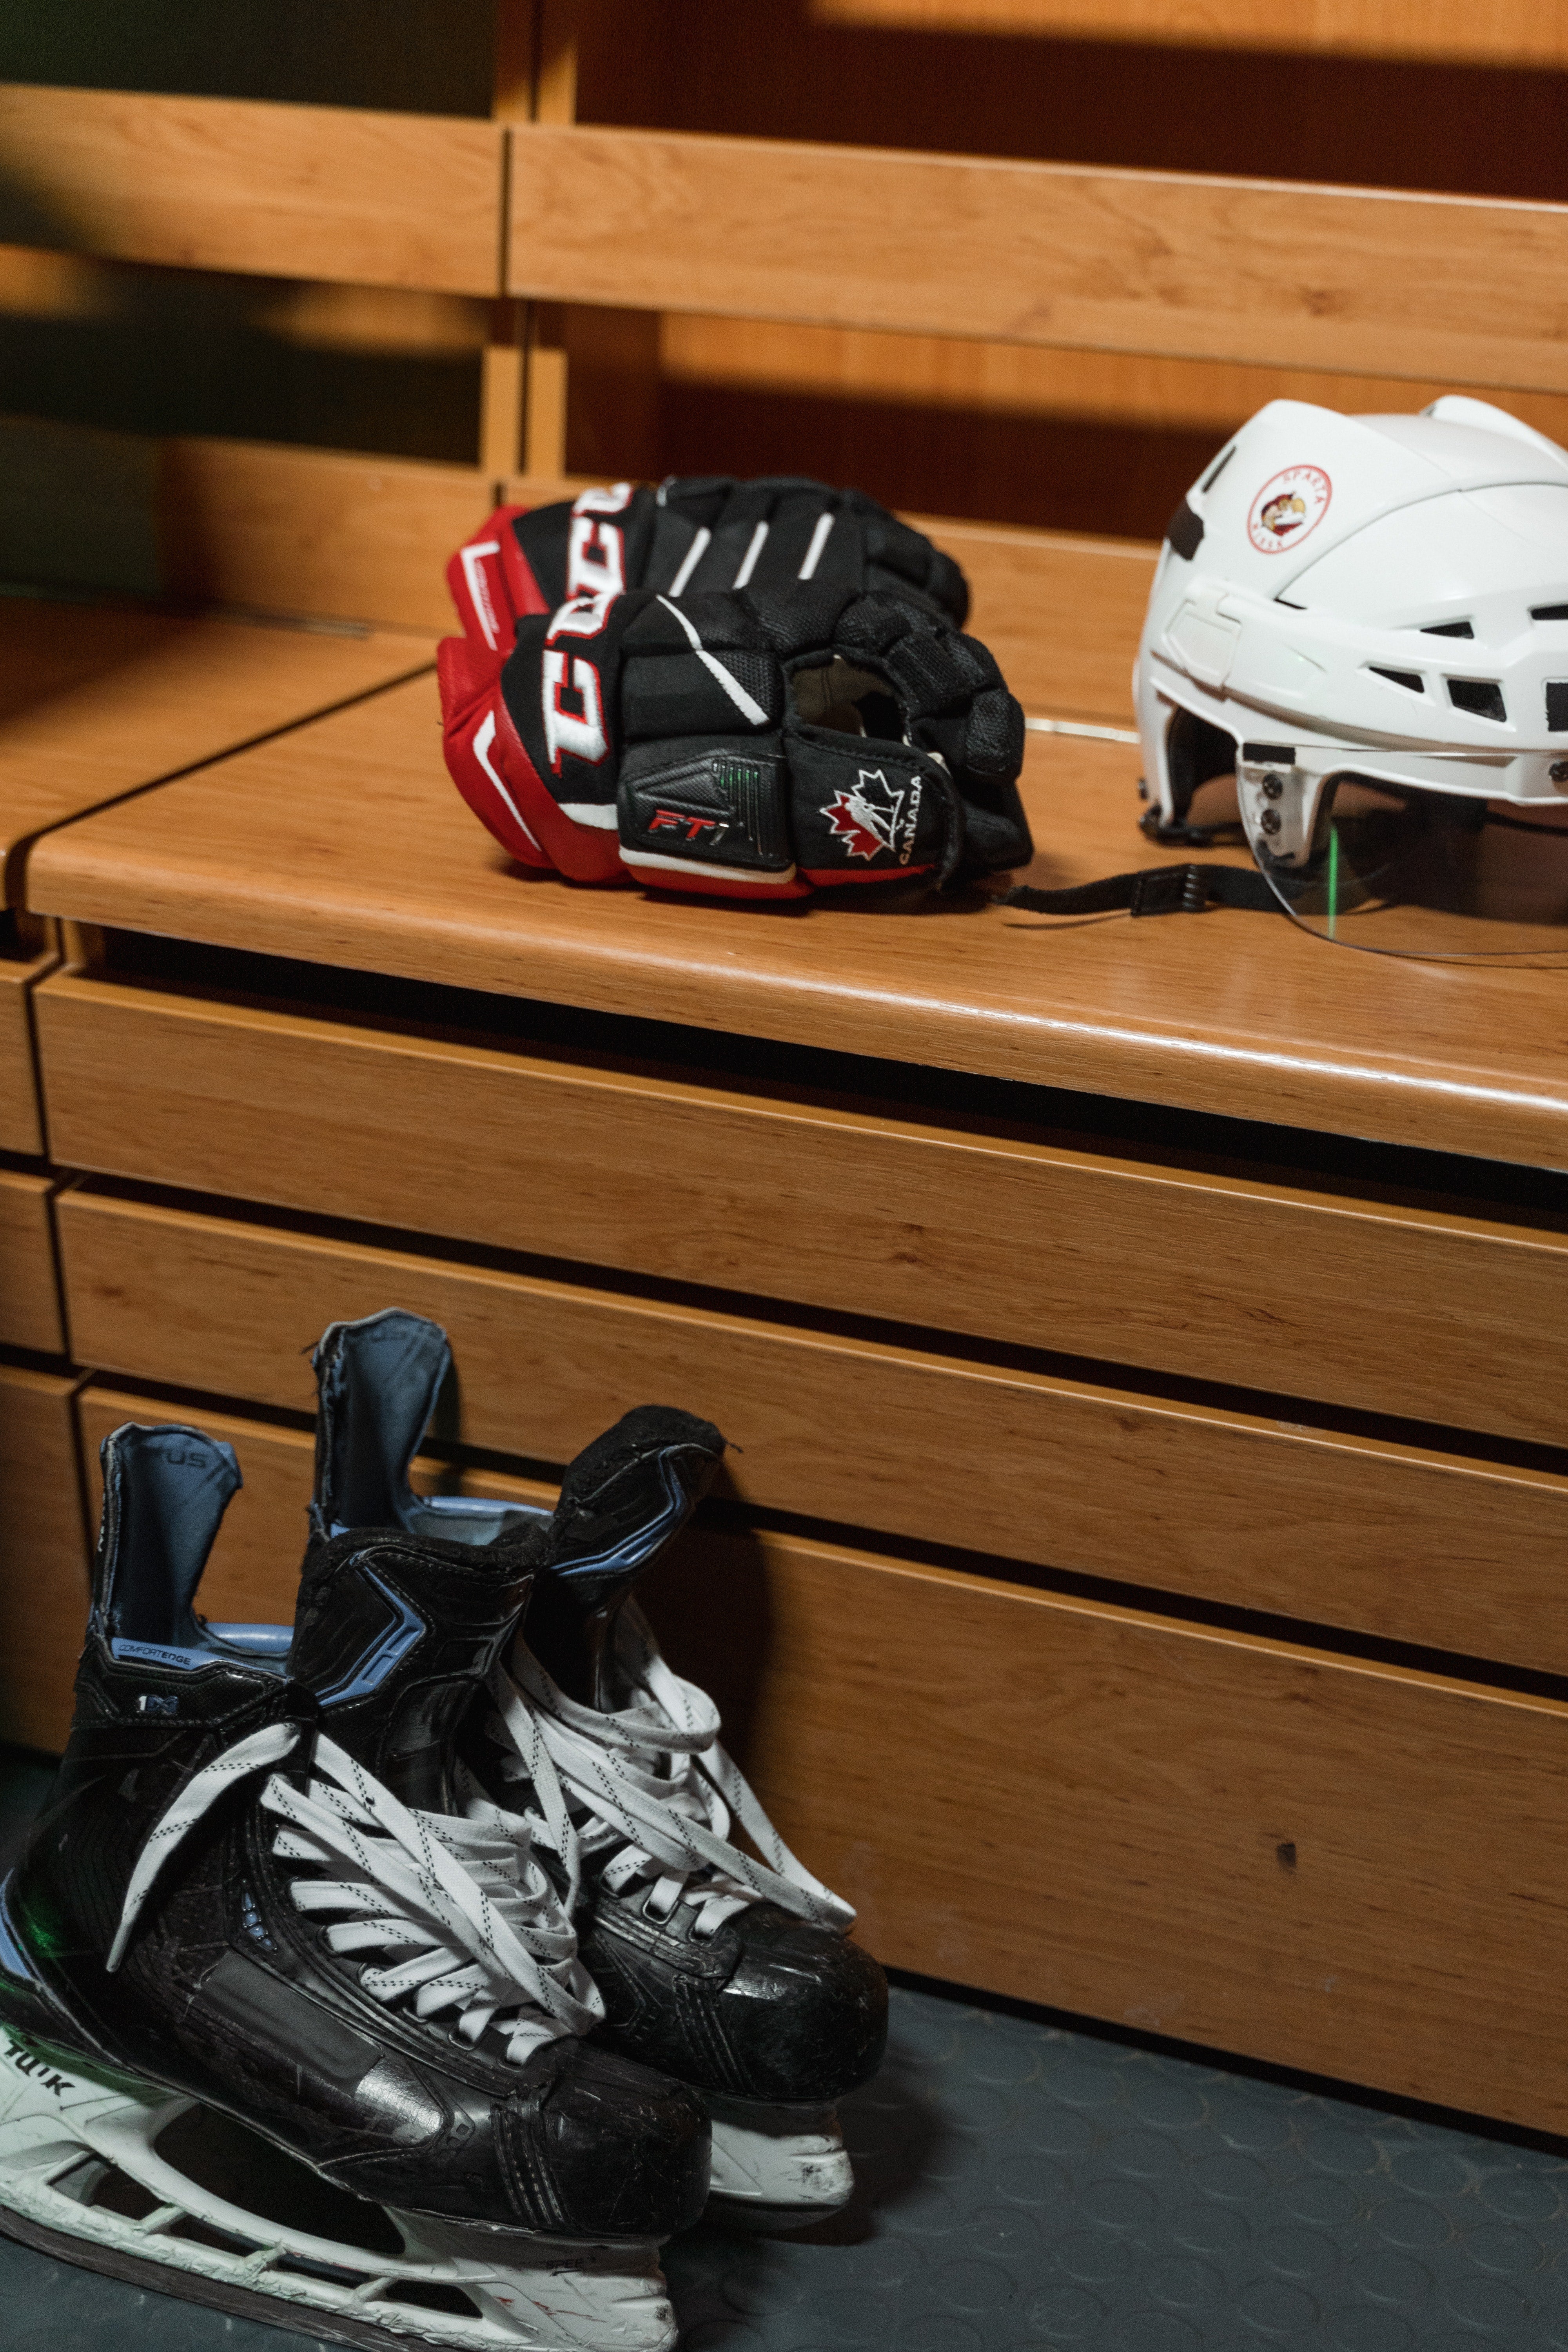 Hockey helmets lie on a wooden bench, and hockey skates stand nearby